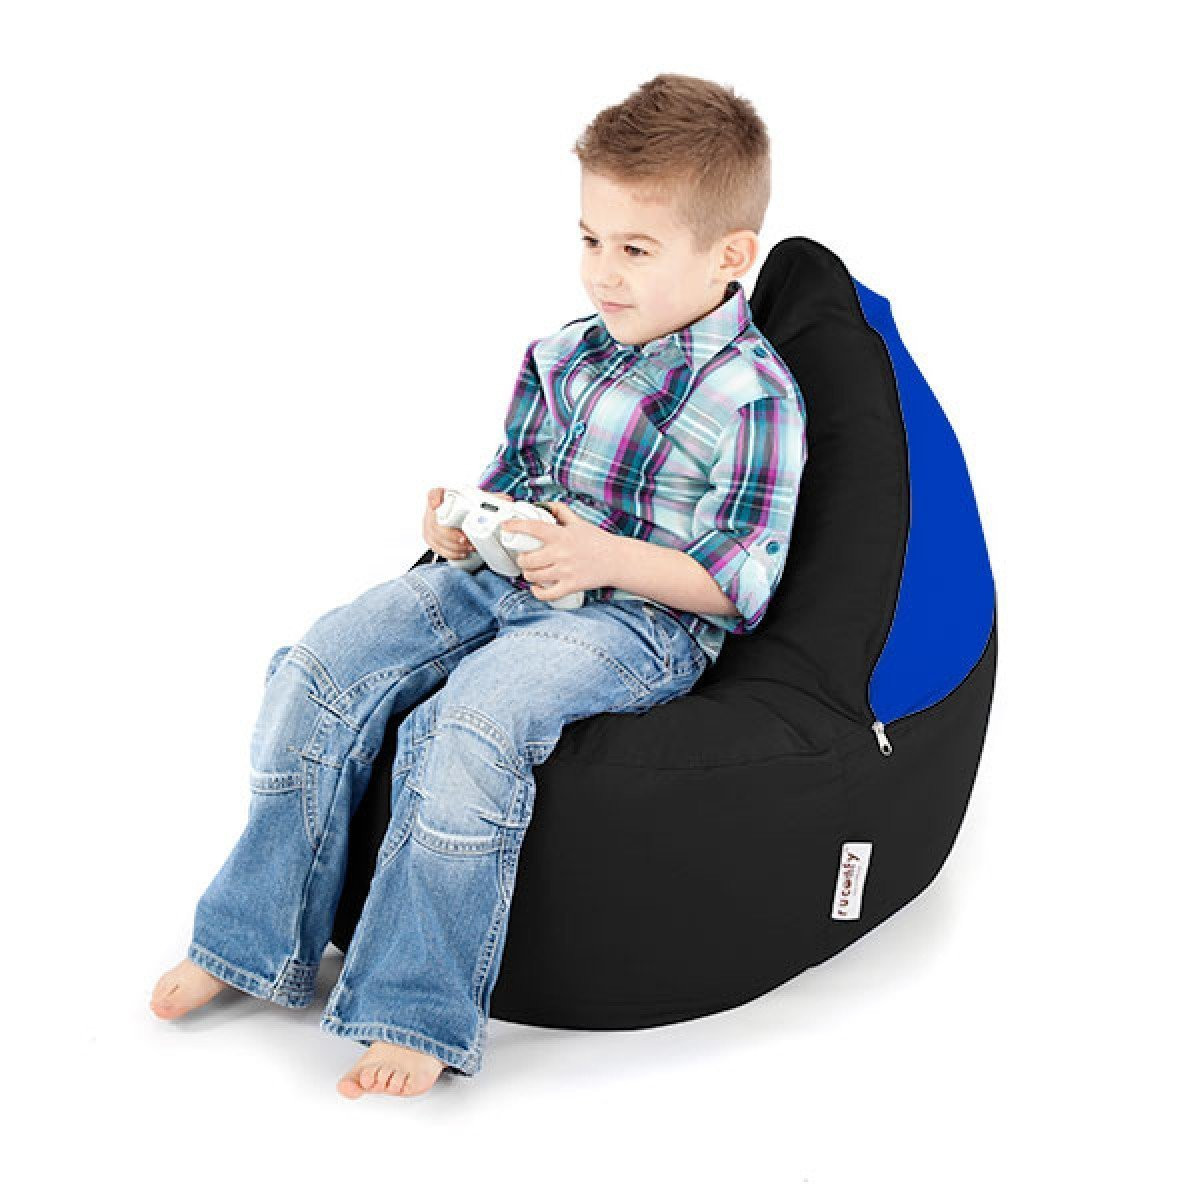 Game Chair for Kids Lovely Gaming Chairs for Kids Home Furniture Design